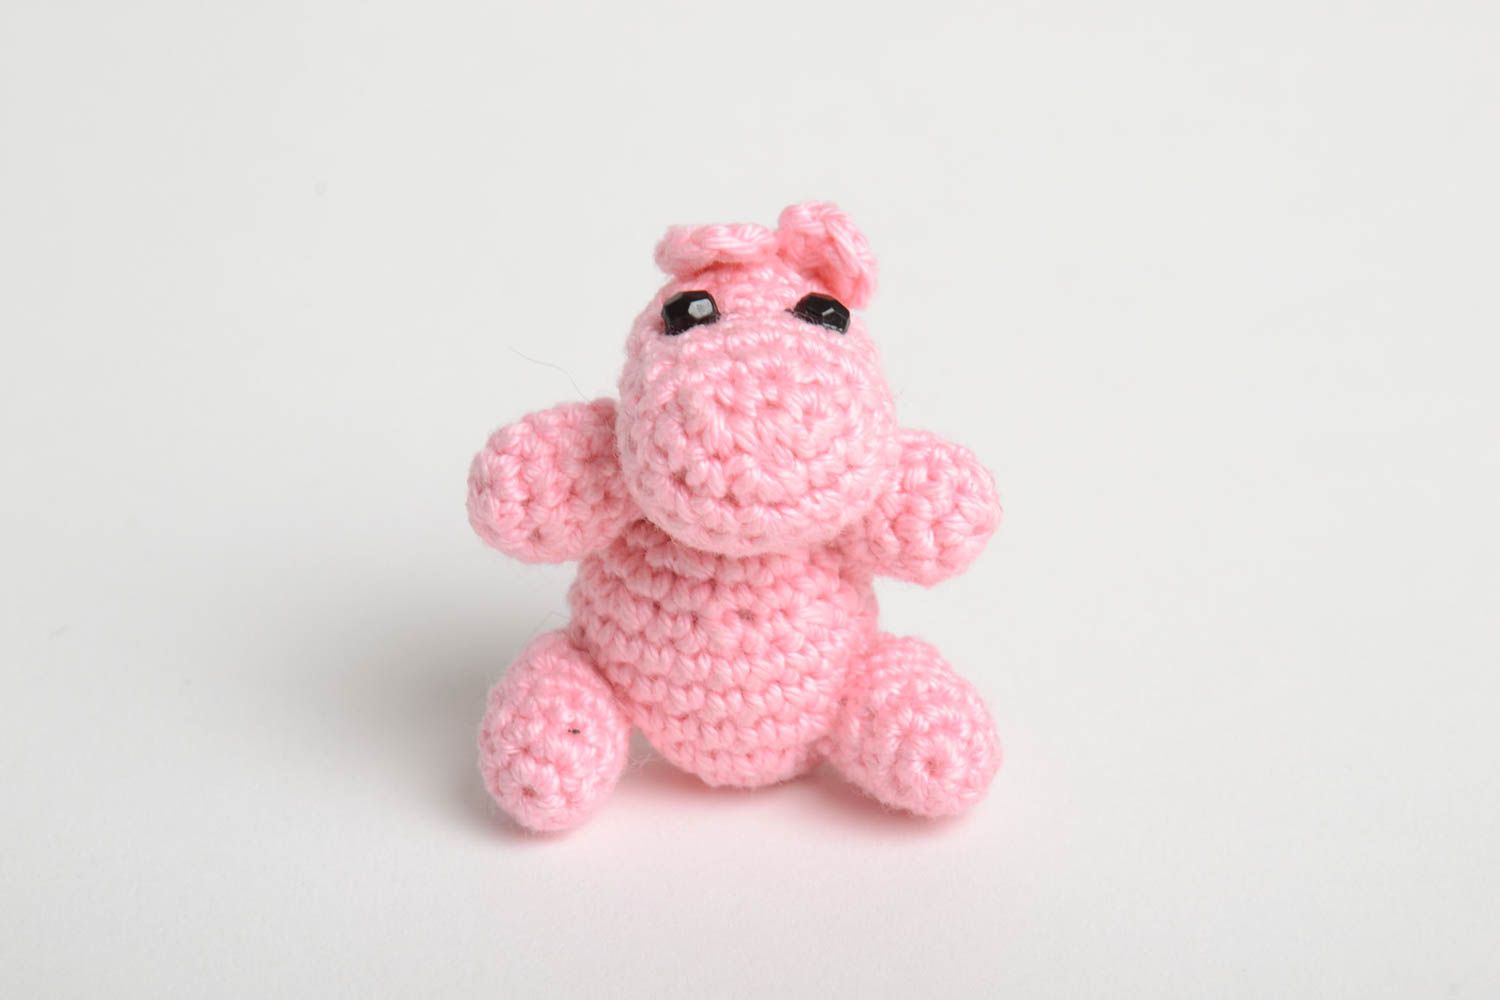 Crocheted pink soft toy unusual present for kids handmade toys cute gift photo 2